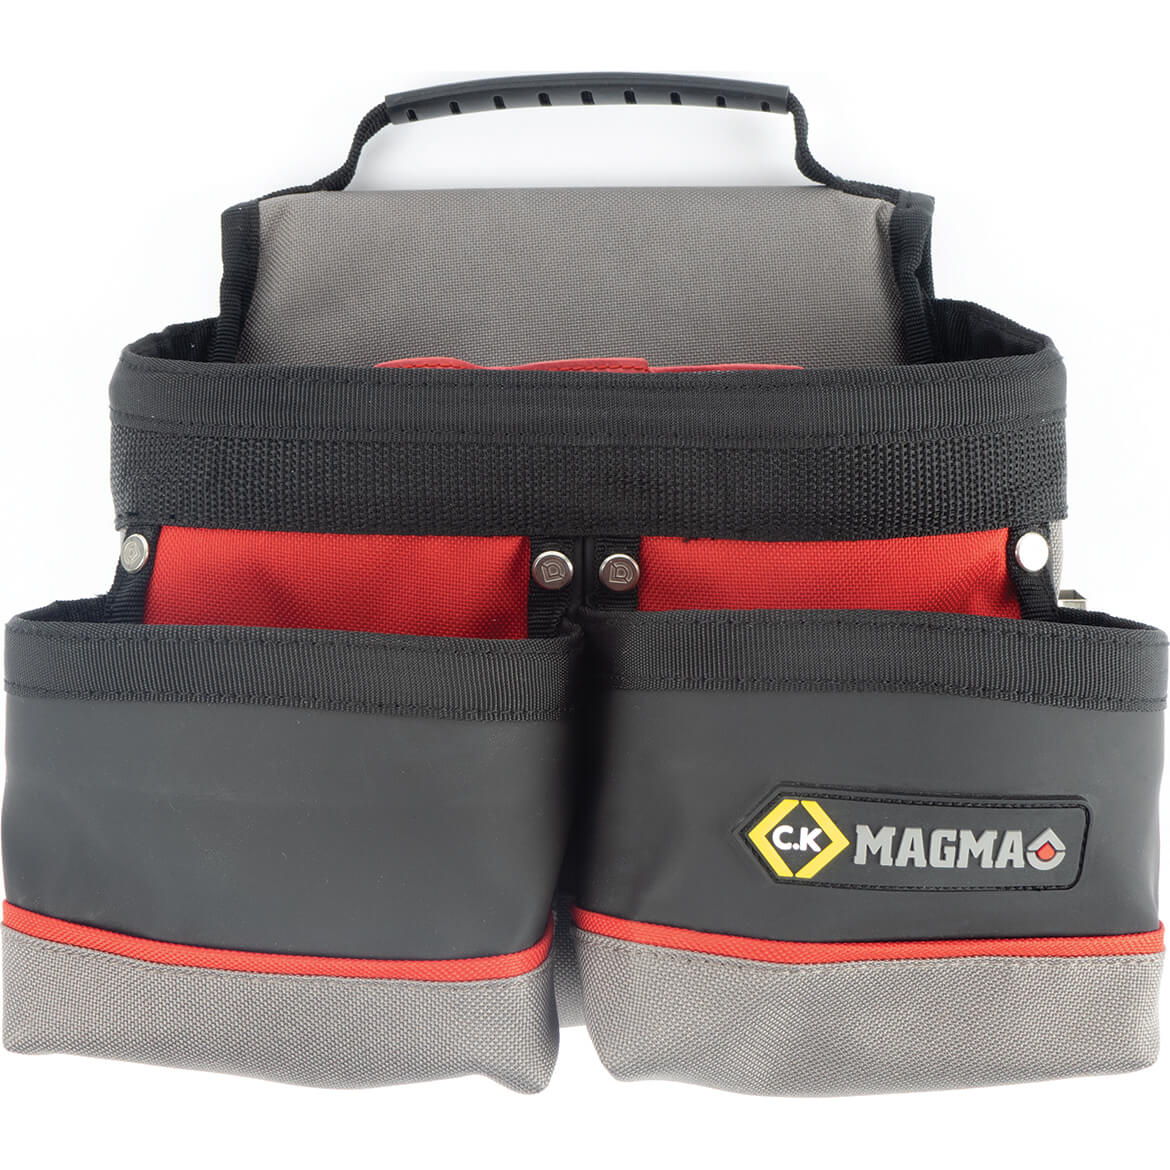 Image of CK Magma Tool Pouch